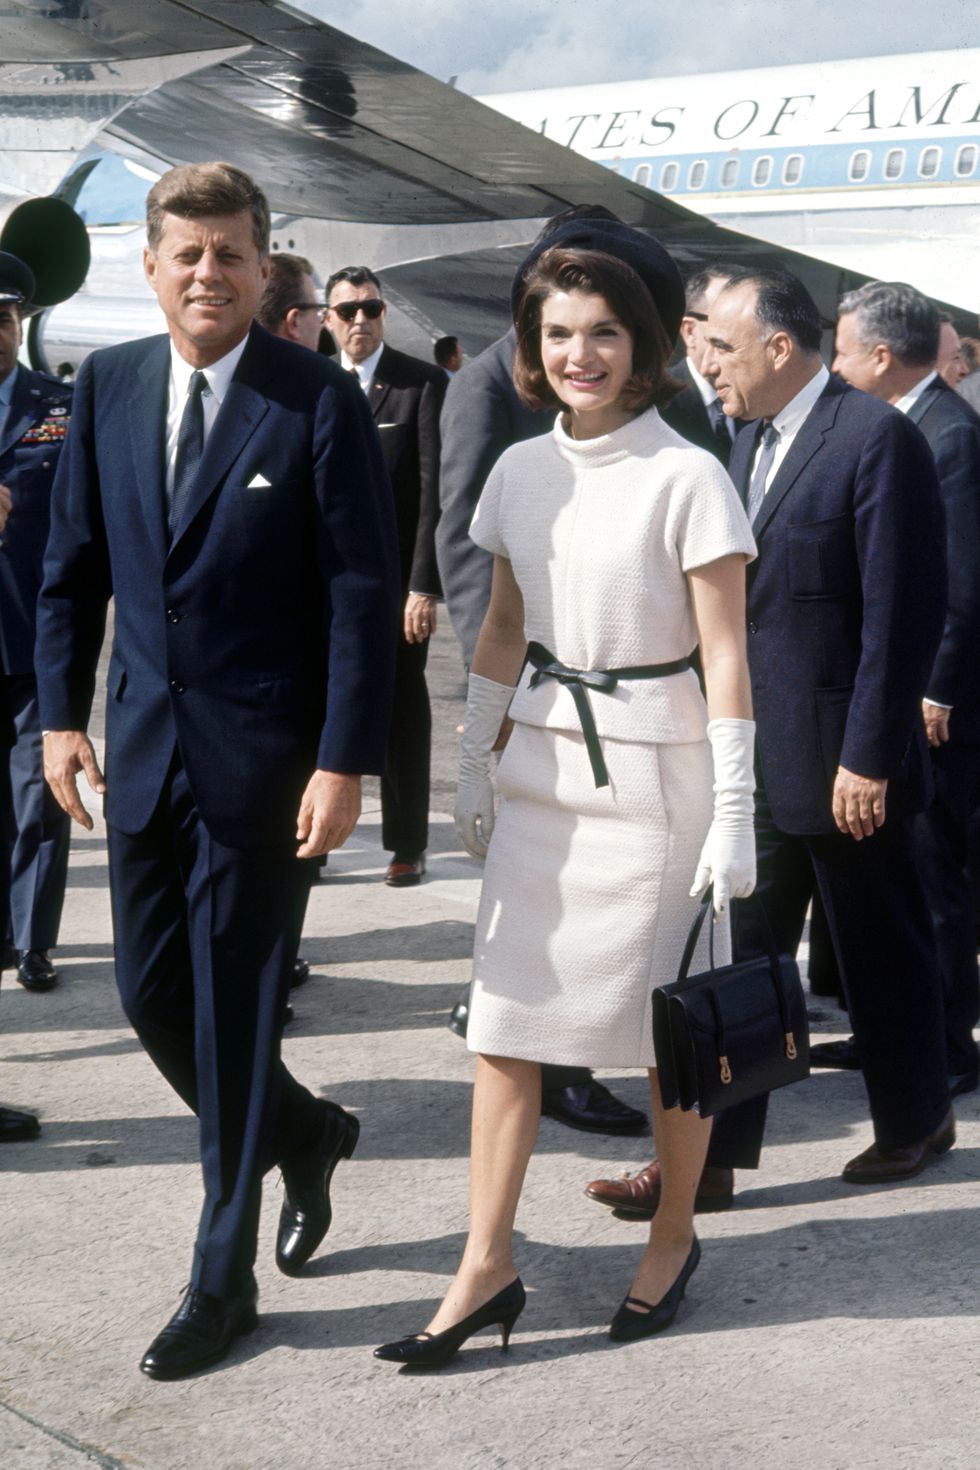 US President John F Kennedy (1917 - 1963) and First Lady Jacqueline Kennedy (1929 - 1994) arriving at San Antonio airport during a campaign tour of Texas, 21st November 1963. The President was assassinated in Dallas the following day. (Photo by Art Rickerby/Time &amp; Life Pictures/Getty Images)